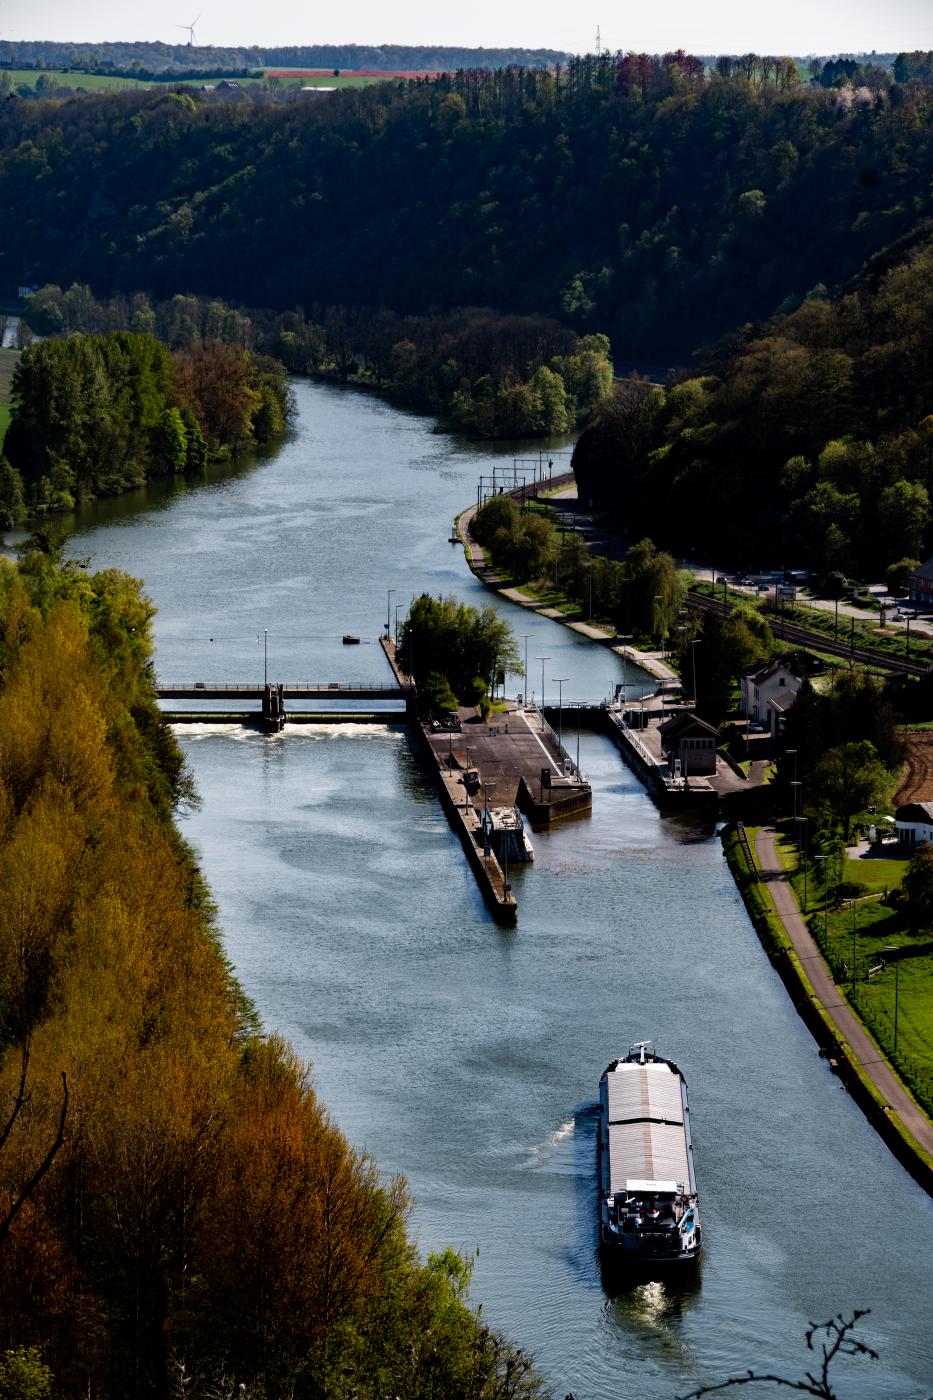 Ship On The Meuse | Buy this image